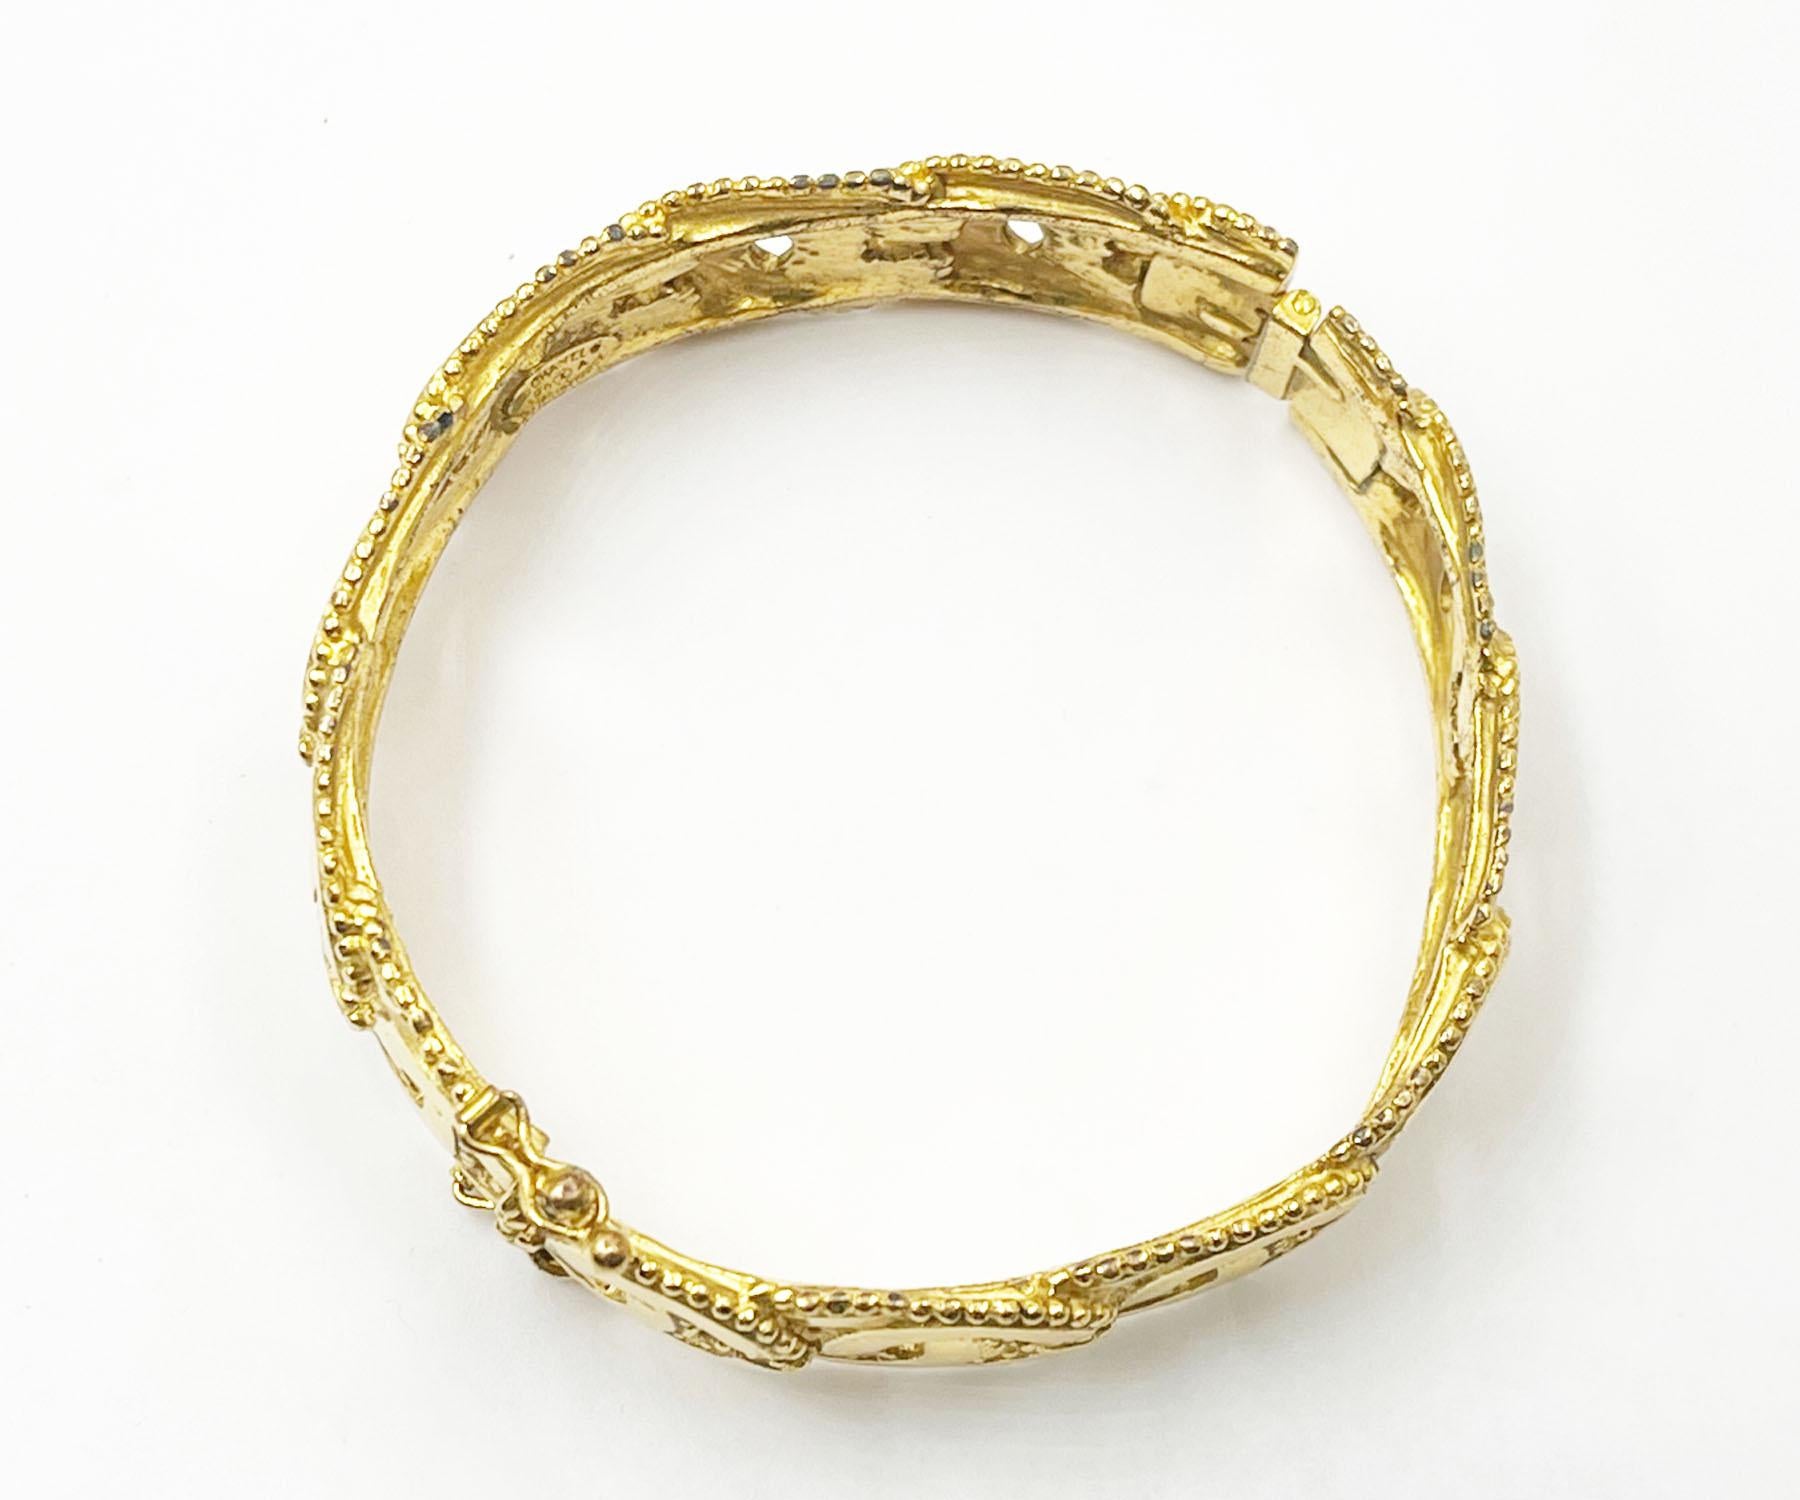 Chanel Vintage Gold Plated Multi CC Dots Bangle Bracelet   In Good Condition For Sale In Pasadena, CA